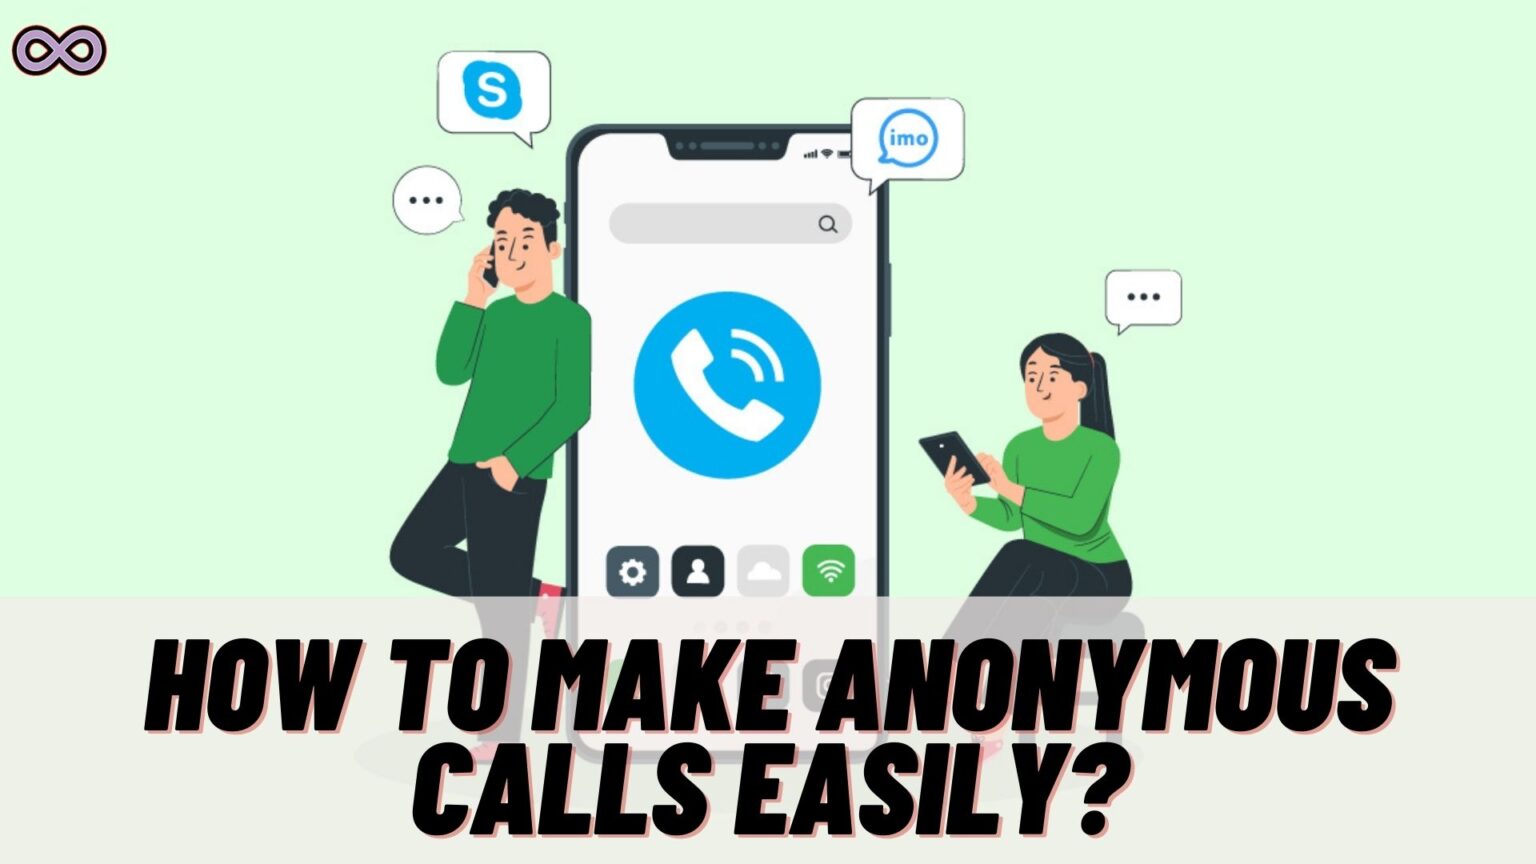 How to Make Anonymous Calls Easily